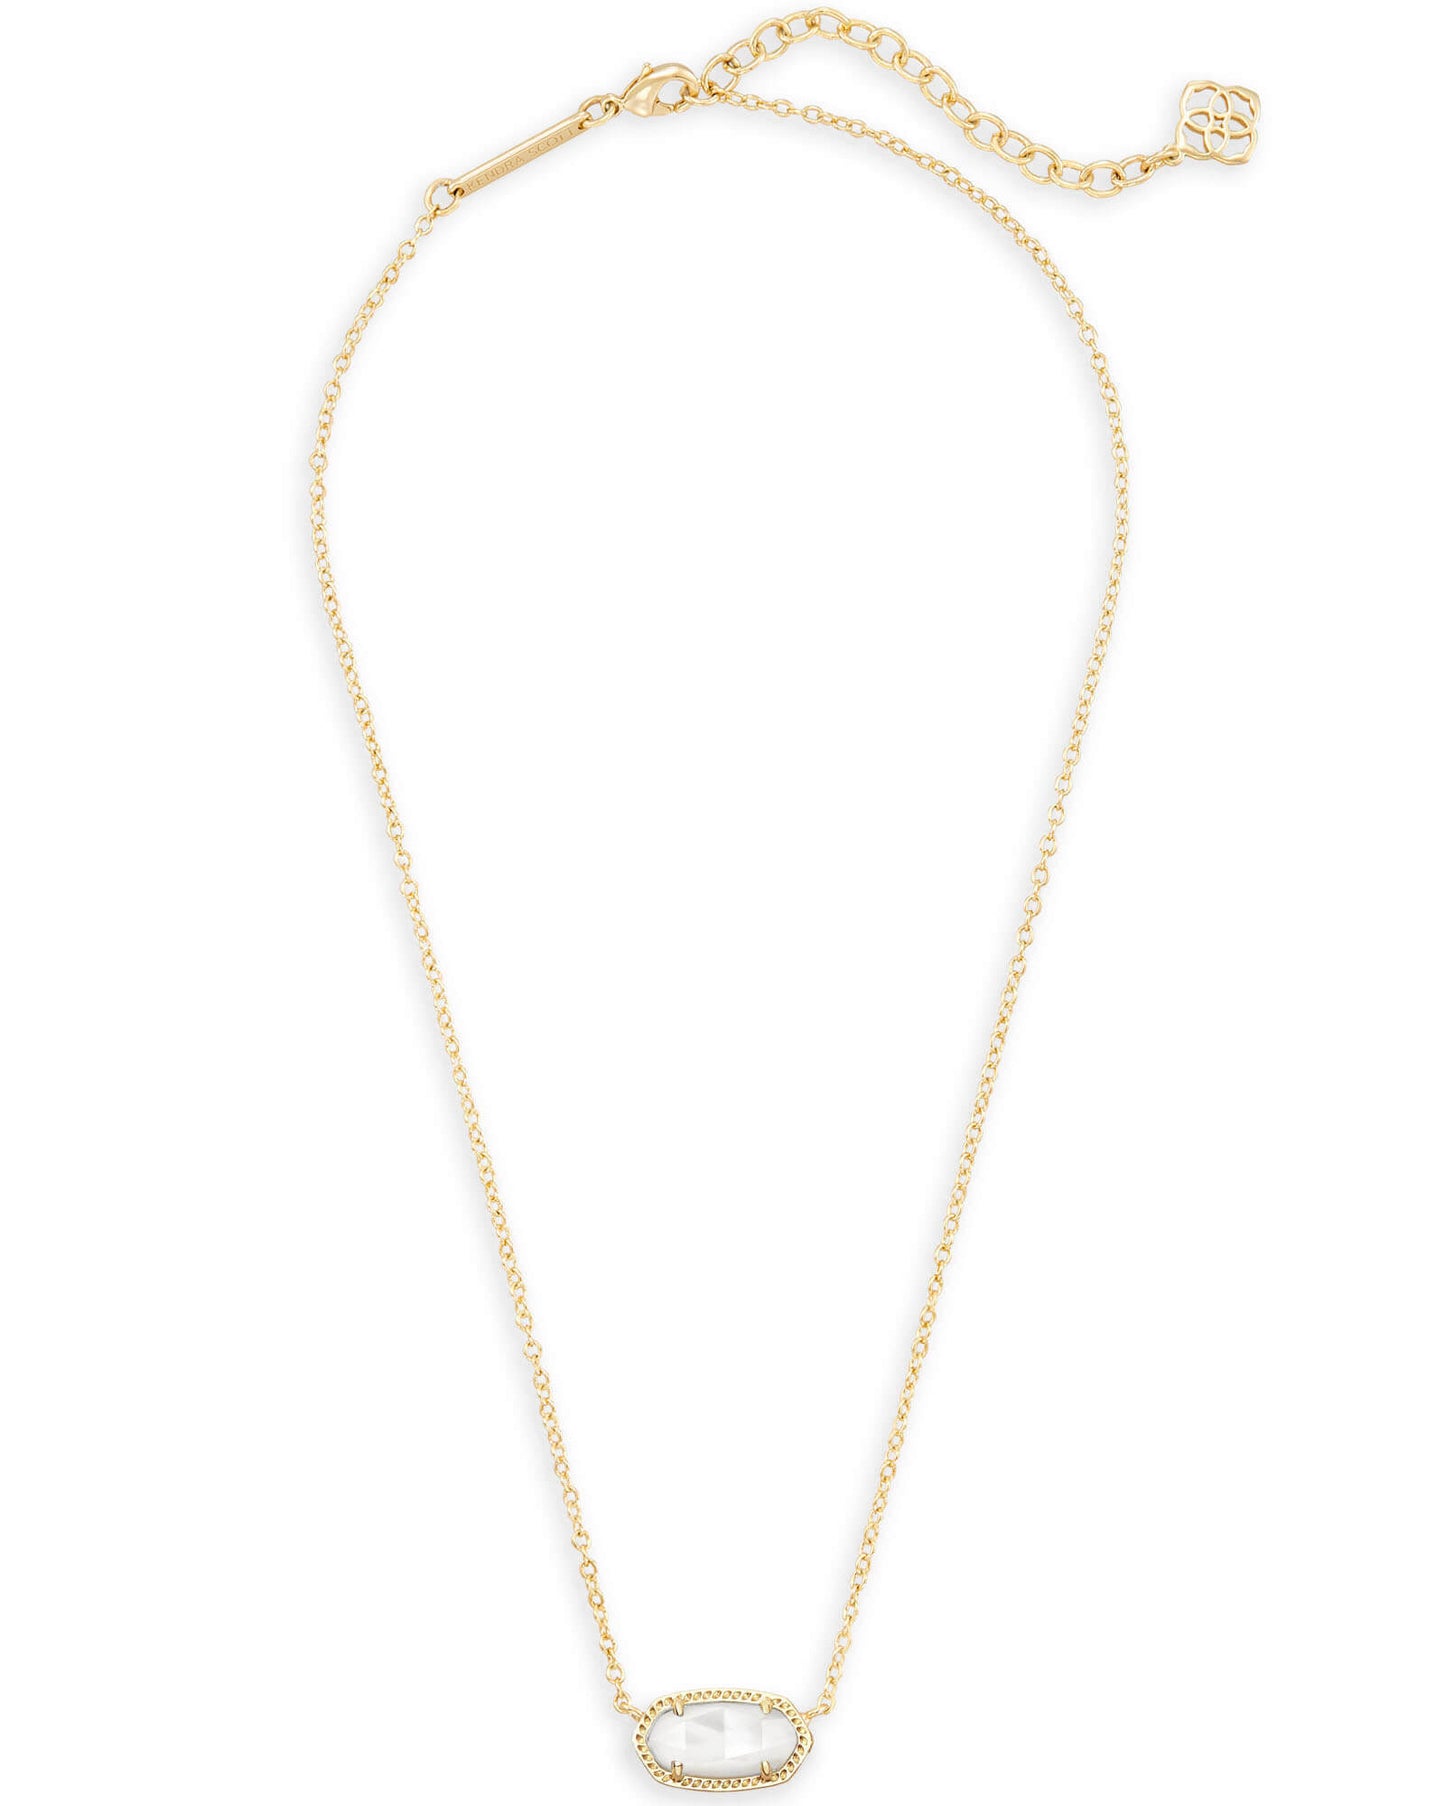 Elisa Gold Pendant Necklace in Ivory Mother-of-Pearl